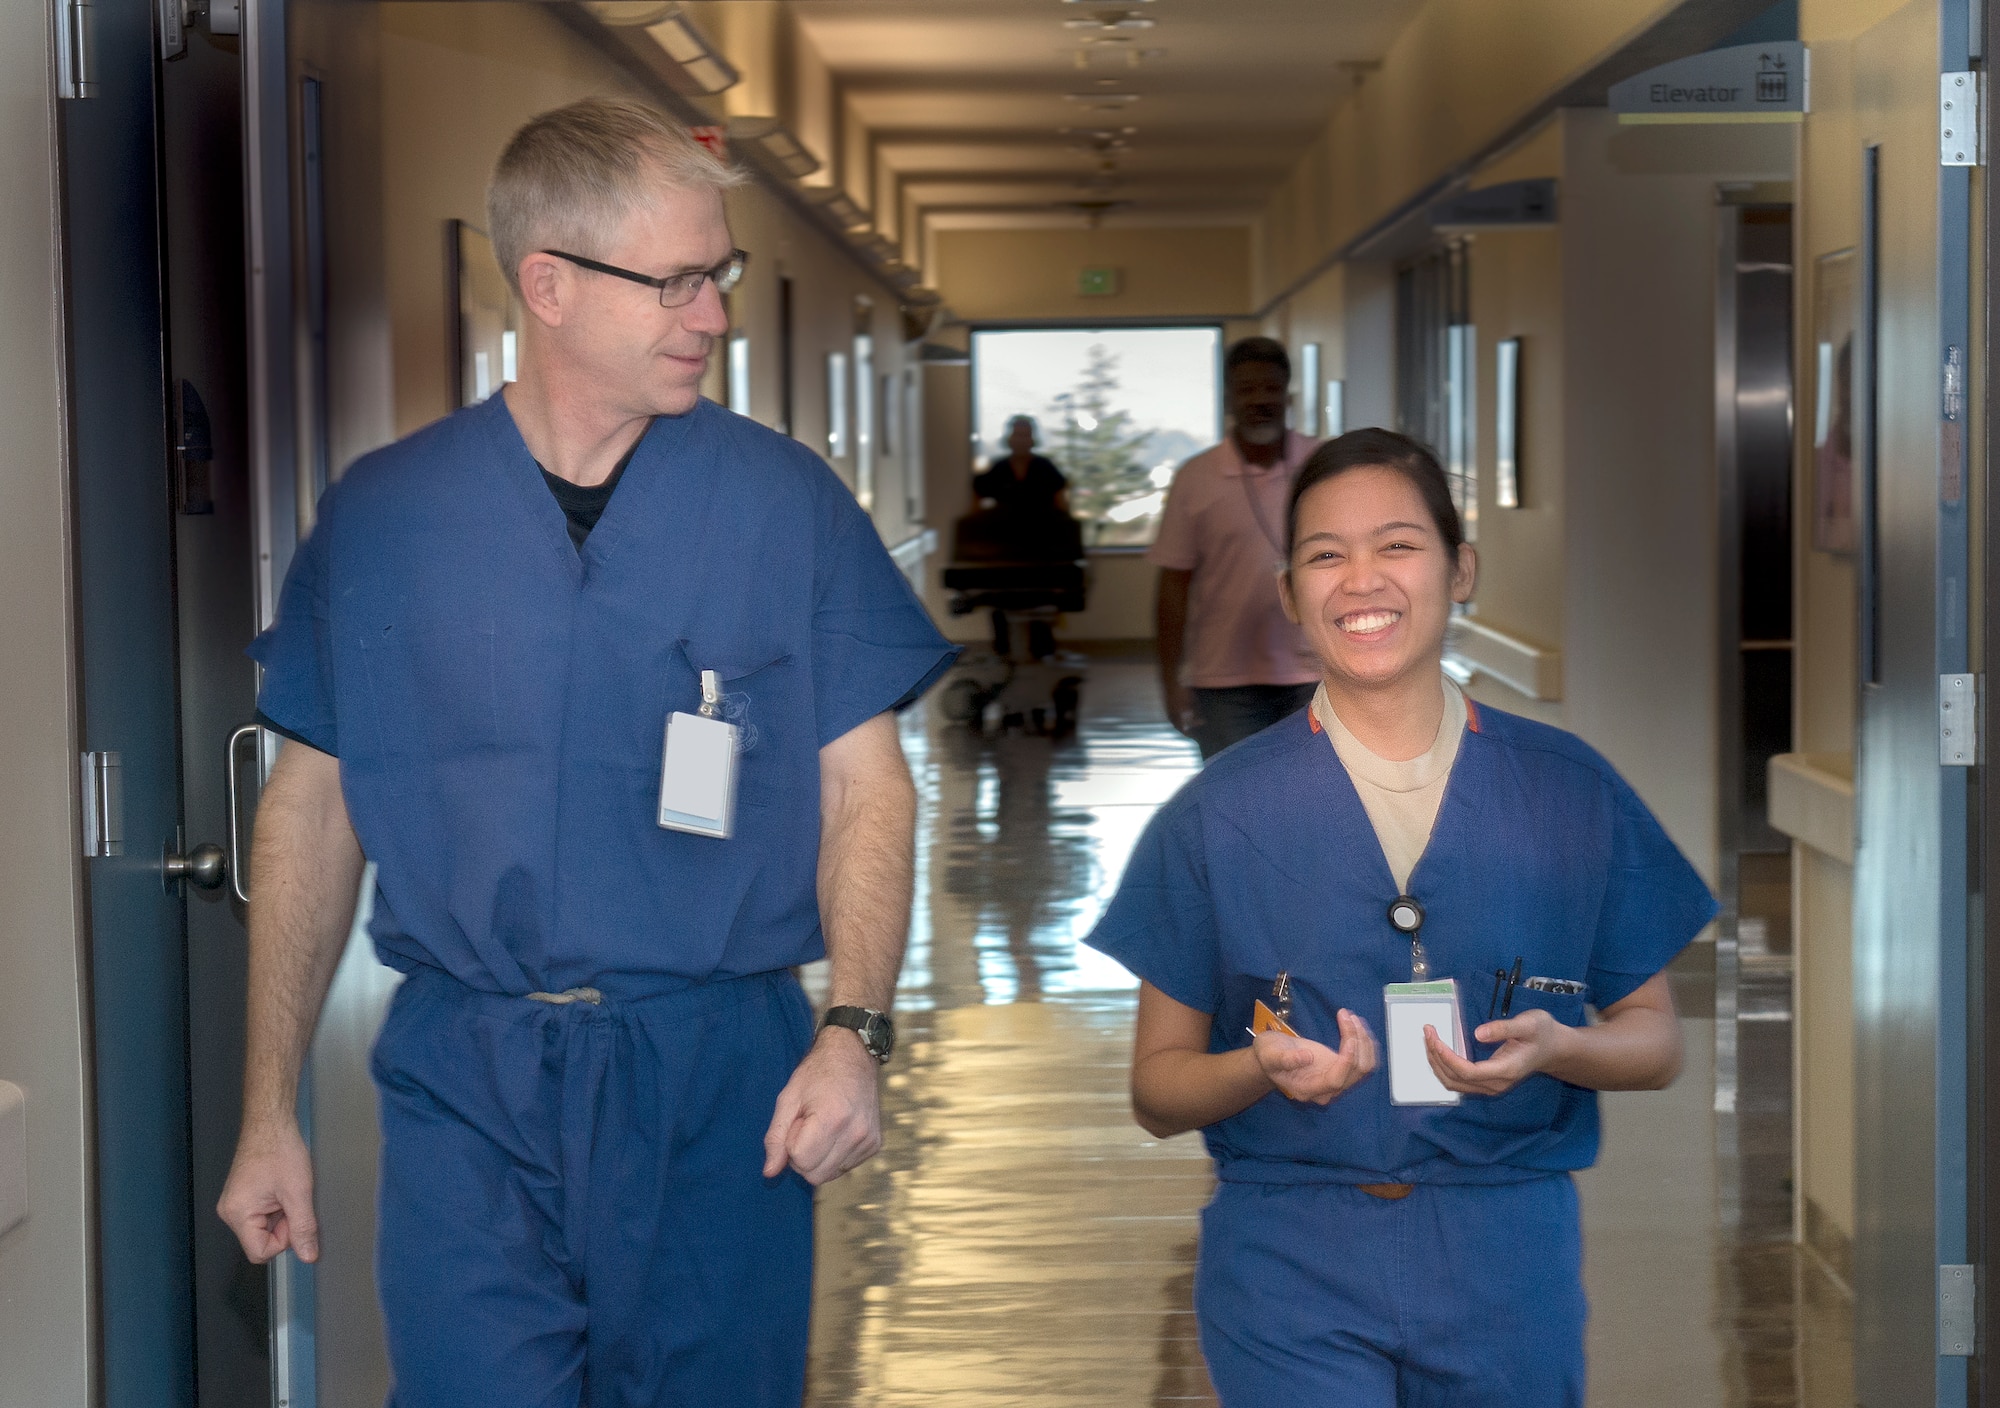 Airman 1st Class Athena Layman, right, 60th Surgical Operations Squadron surgical technician, walks with Col. Joel Jackson, 60th Air Mobility Wing commander, Jan. 15, 2016, prior to Jackson shadowing her for the day as part of the Works With Airman program at Travis Air Force Base, California, The purpose of the program is to allow senior base leadership to shadow a junior Airman within their primary duties. (U.S. Air Force photo by Heide Couch)